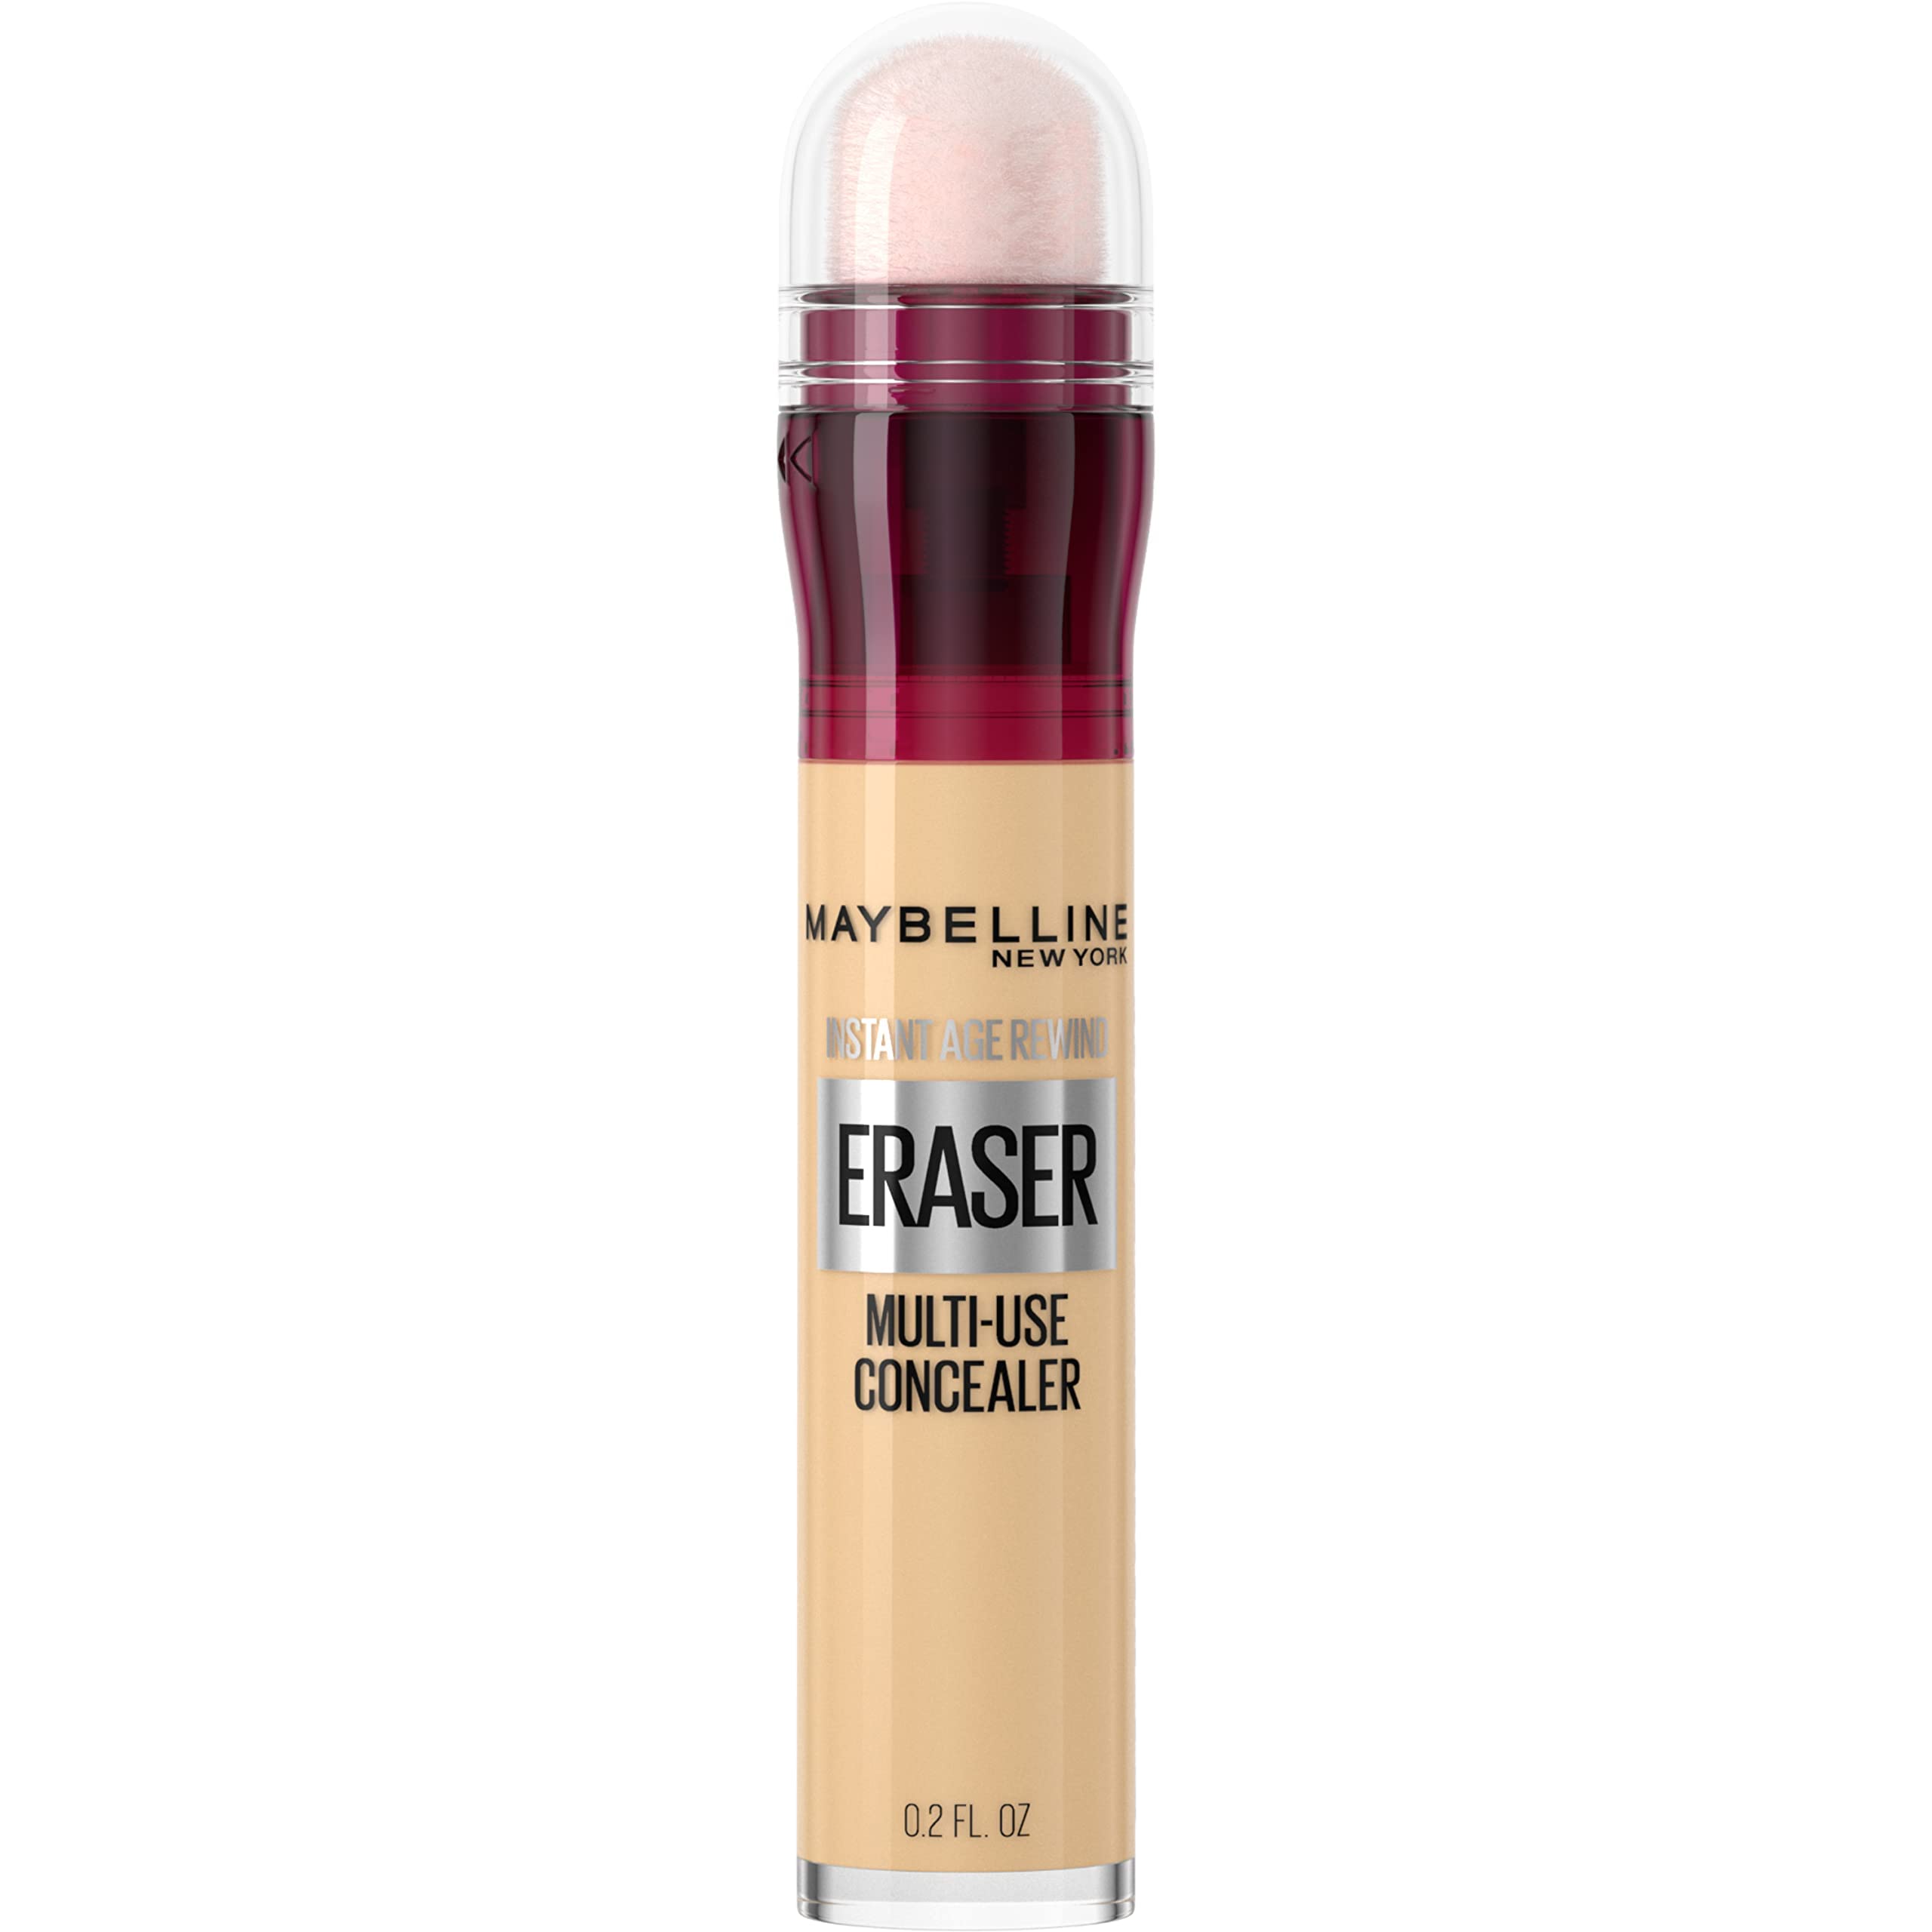 Maybelline New York Instant Age Rewind Eraser Dark Circles Treatment Multi-Use Concealer, 150, 1 Count (Packaging May Vary)